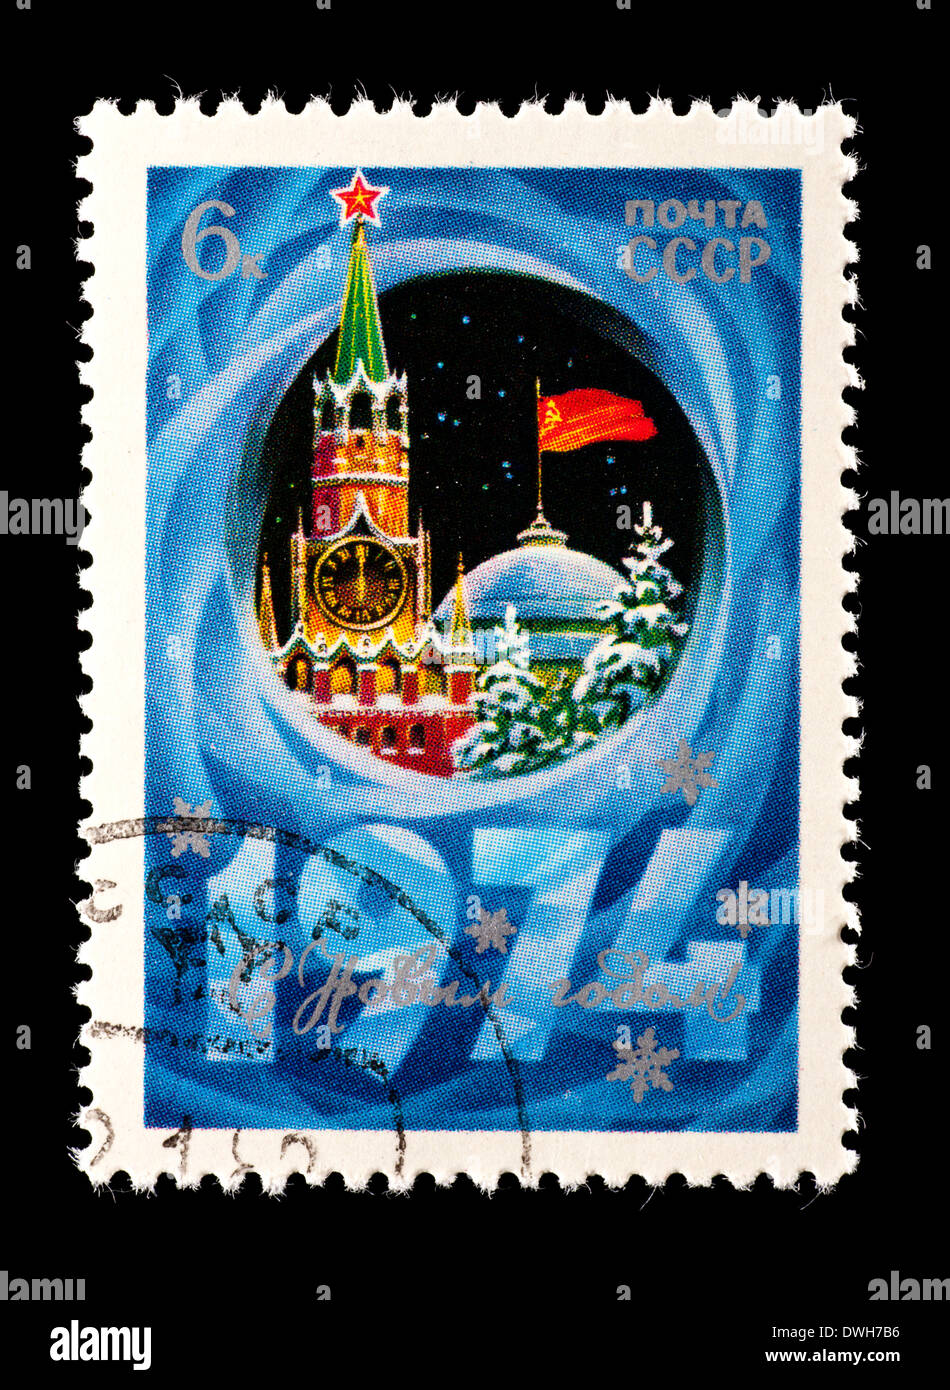 Postage stamp from the Soviet Union (USSR) depicting the Spasski Tower in Moscow, issued for the New Year, 1974. Stock Photo